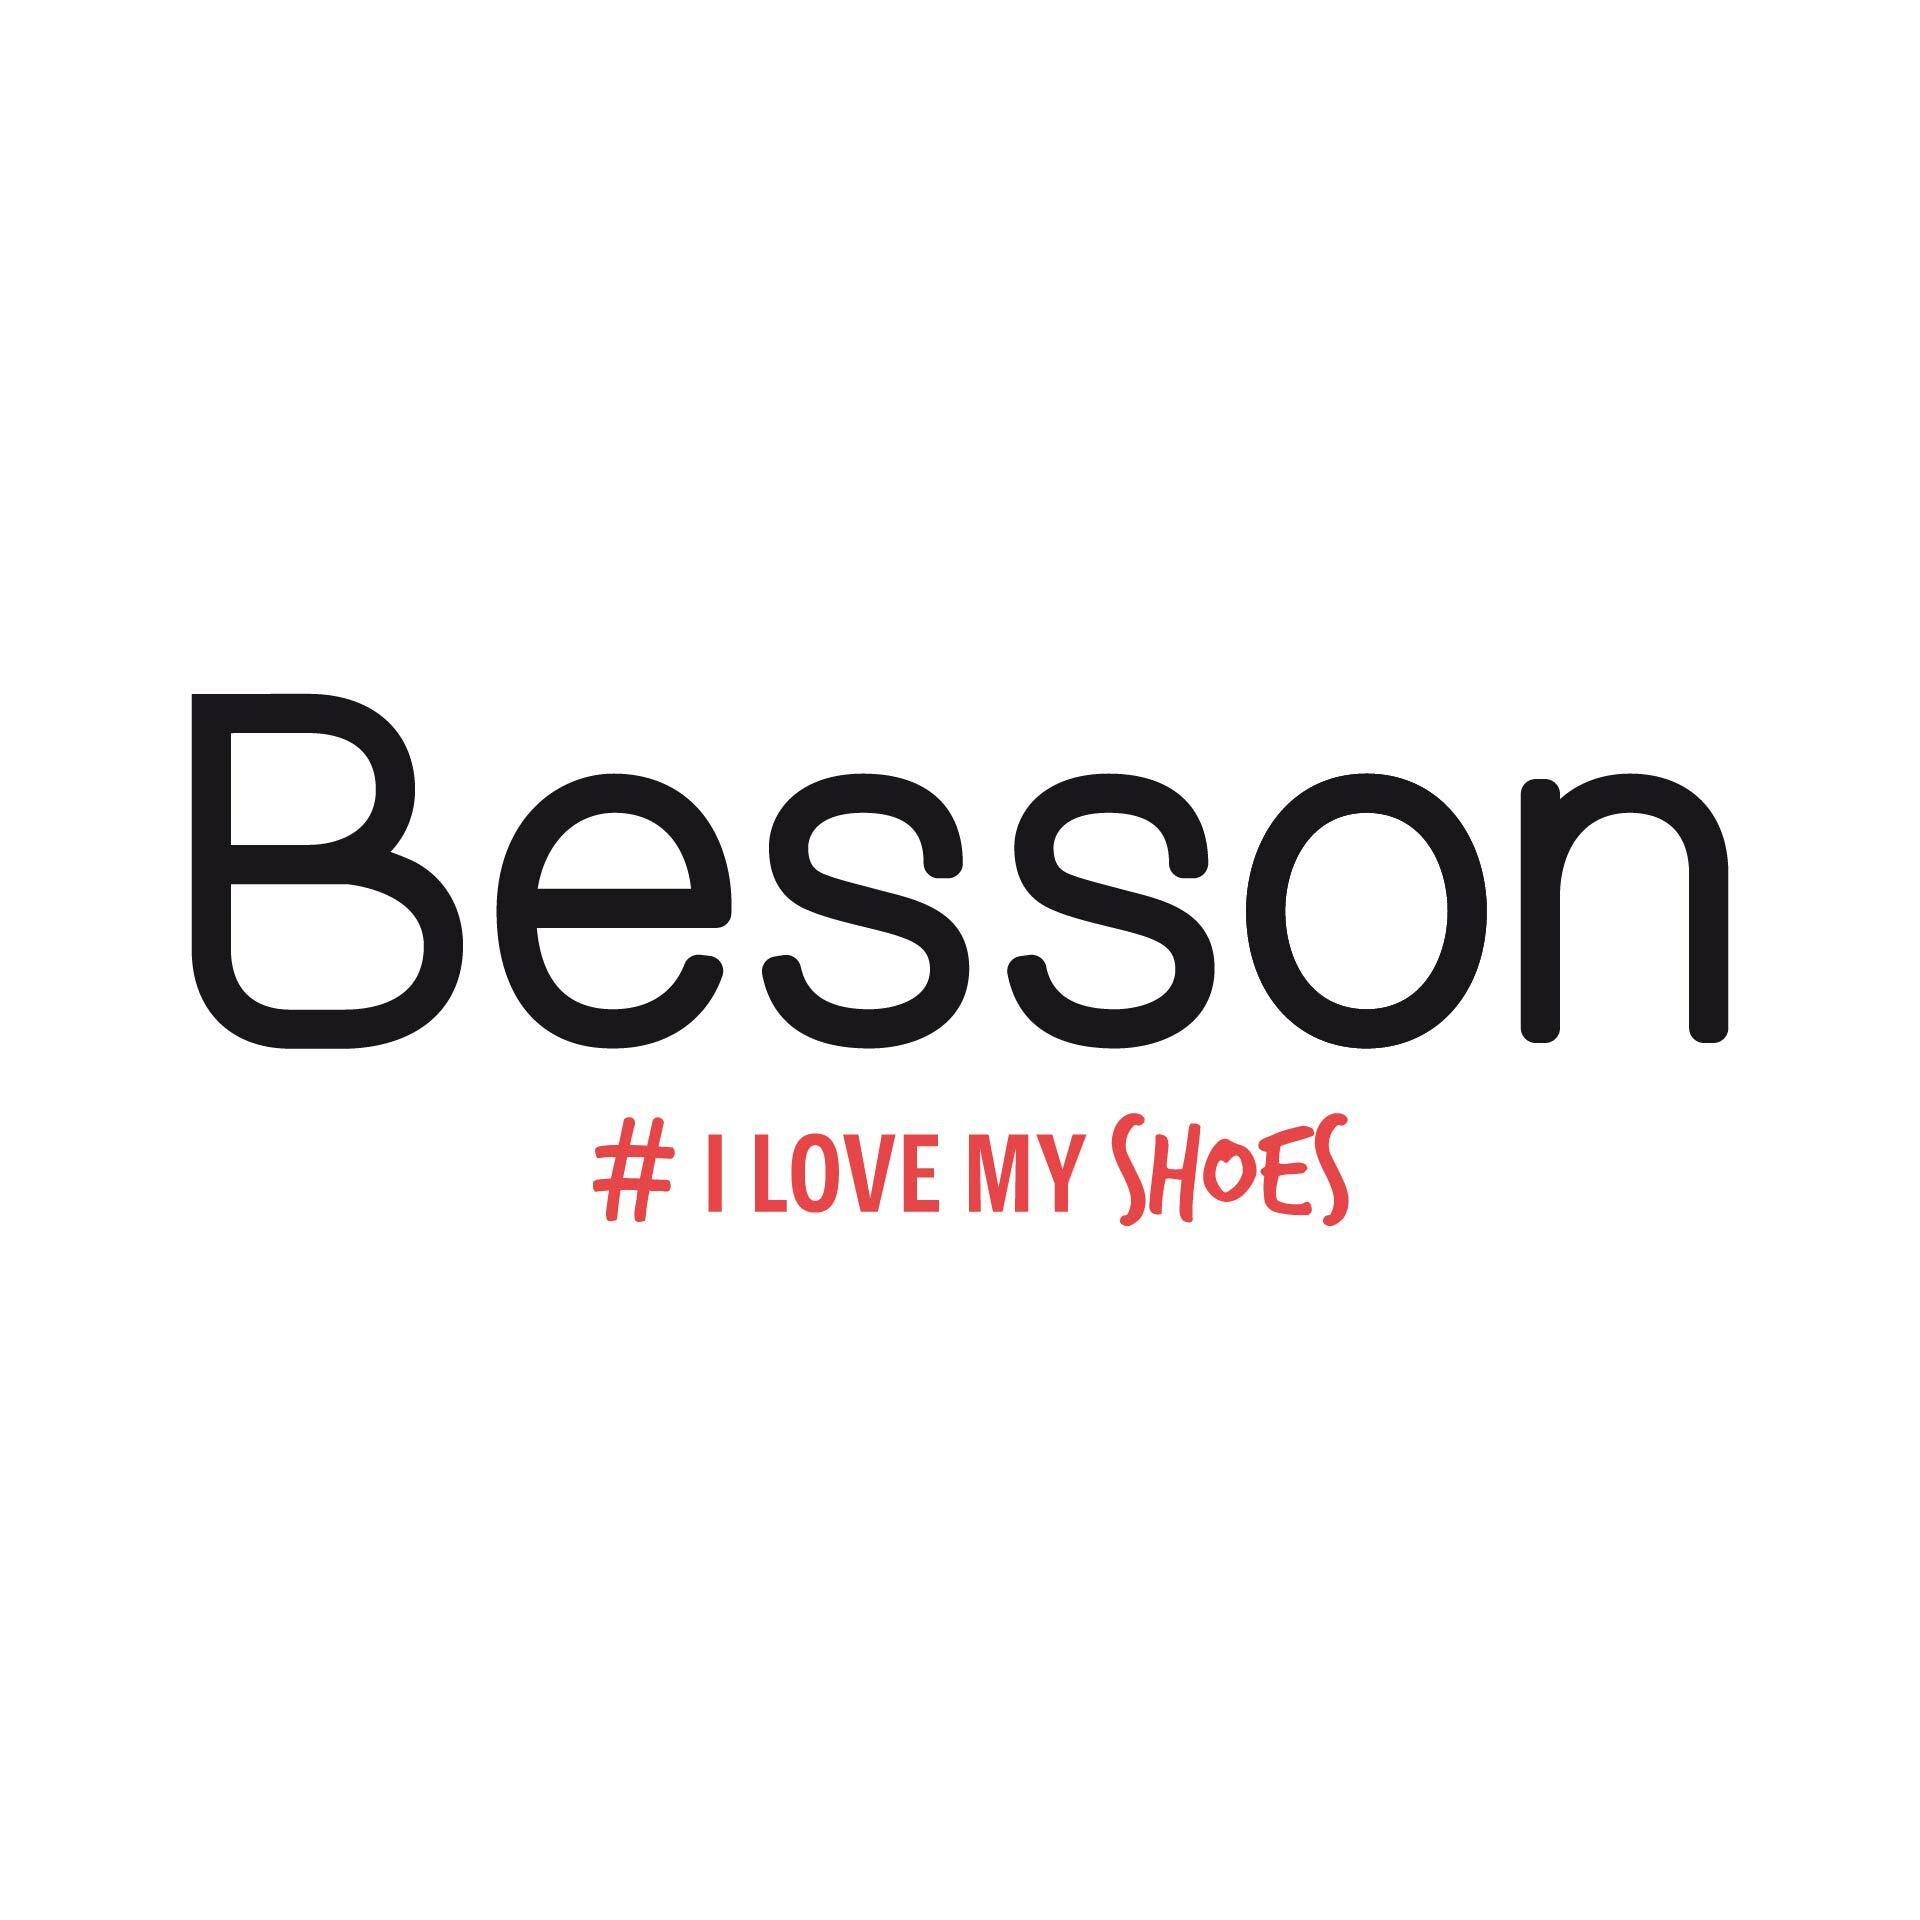 Besson Chaussures Bayonne Anglet Anglet